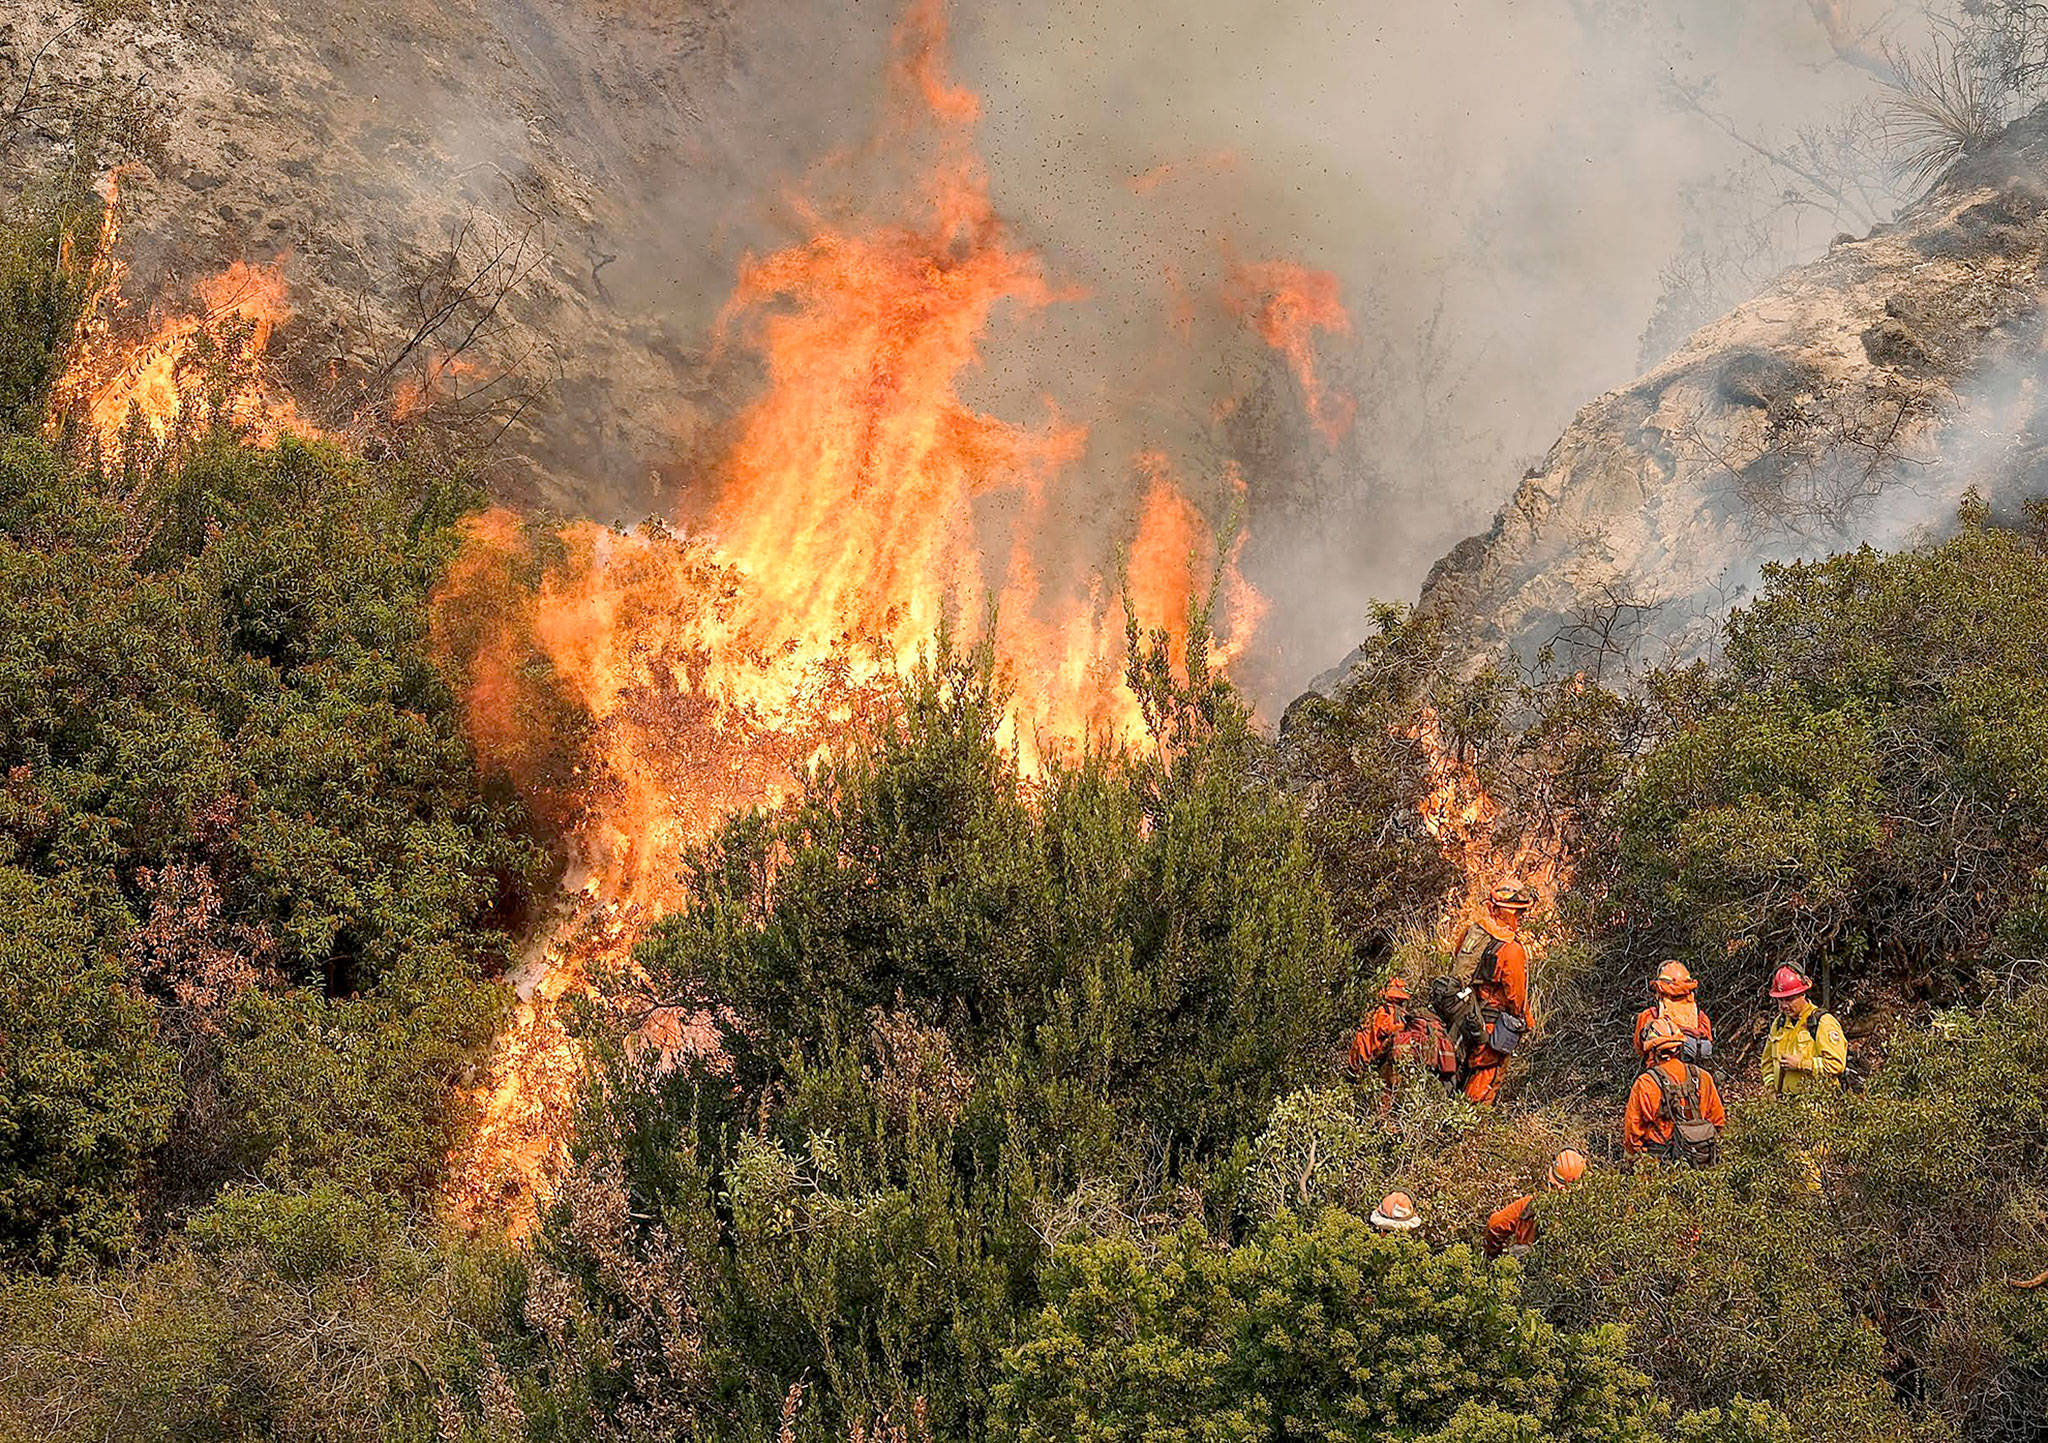 A Cal Fire crew battles a brushfire on the hillside in Burbank, California, on Saturday. Several hundred firefighters worked to contain the blaze that chewed through brush-covered hills, prompting evacuation orders for homes in Los Angeles, Burbank and Glendale. (AP Photo/Ringo Chiu)